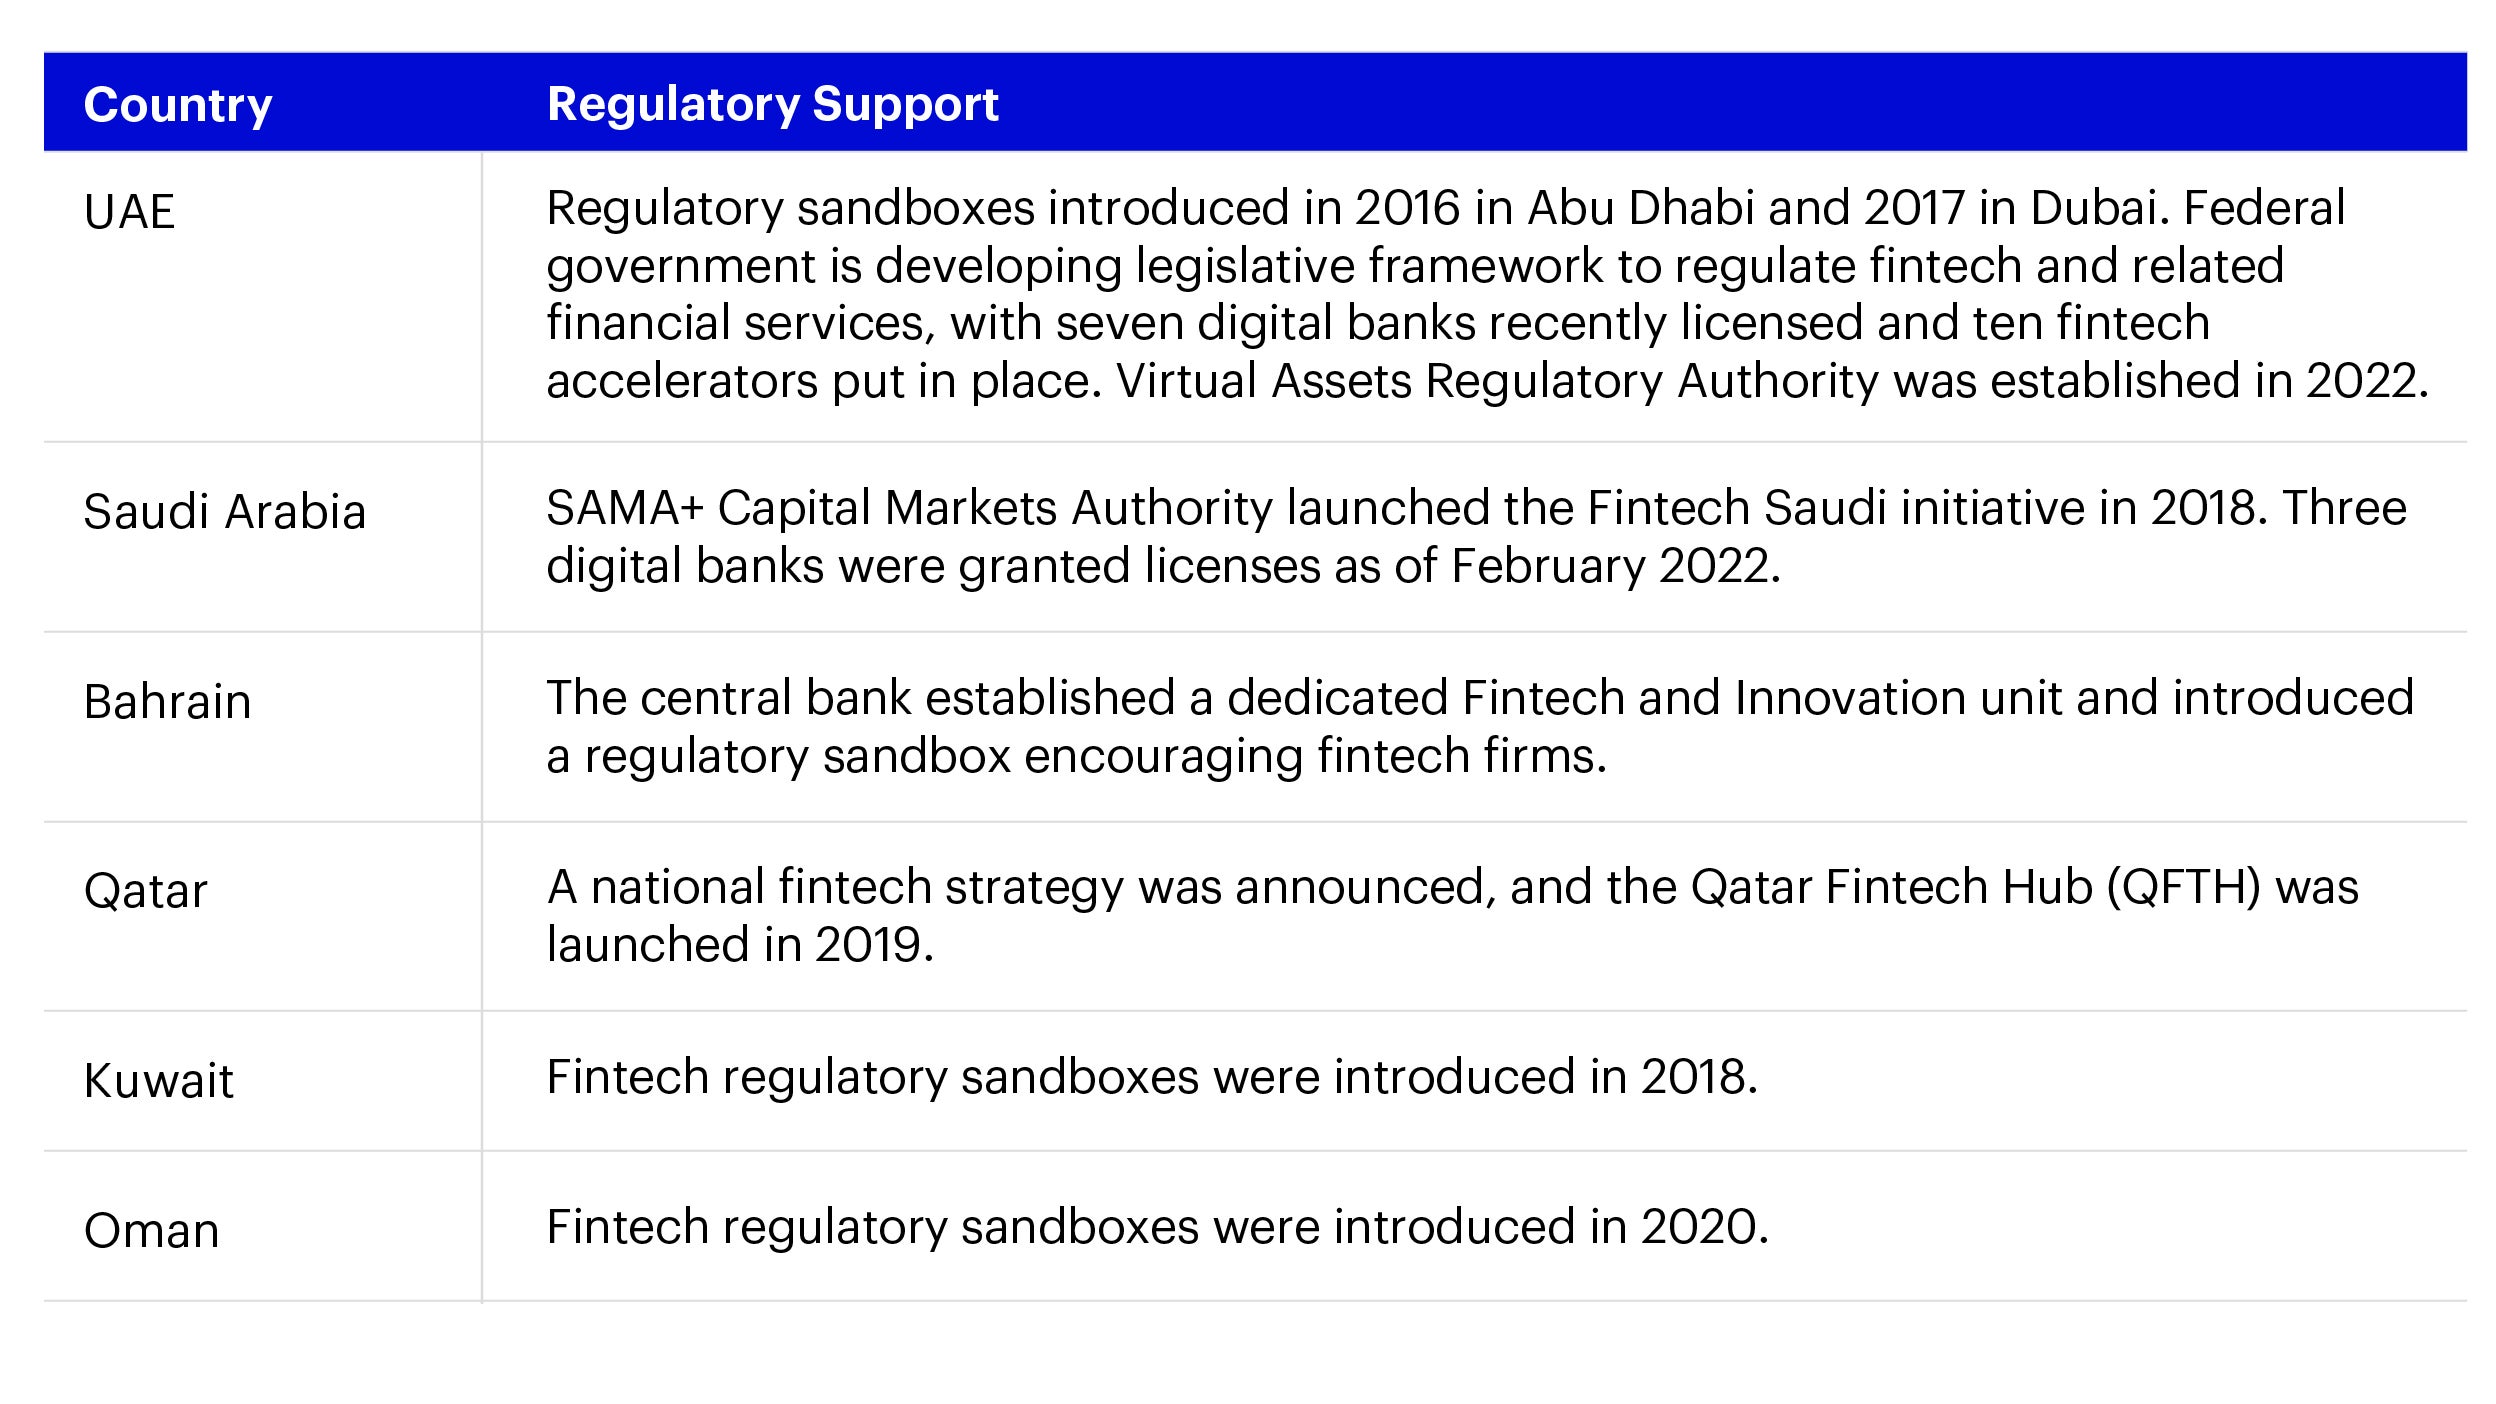 Table 1 – Regulations supporting fintech and digitalization in Middle Eastern countries  